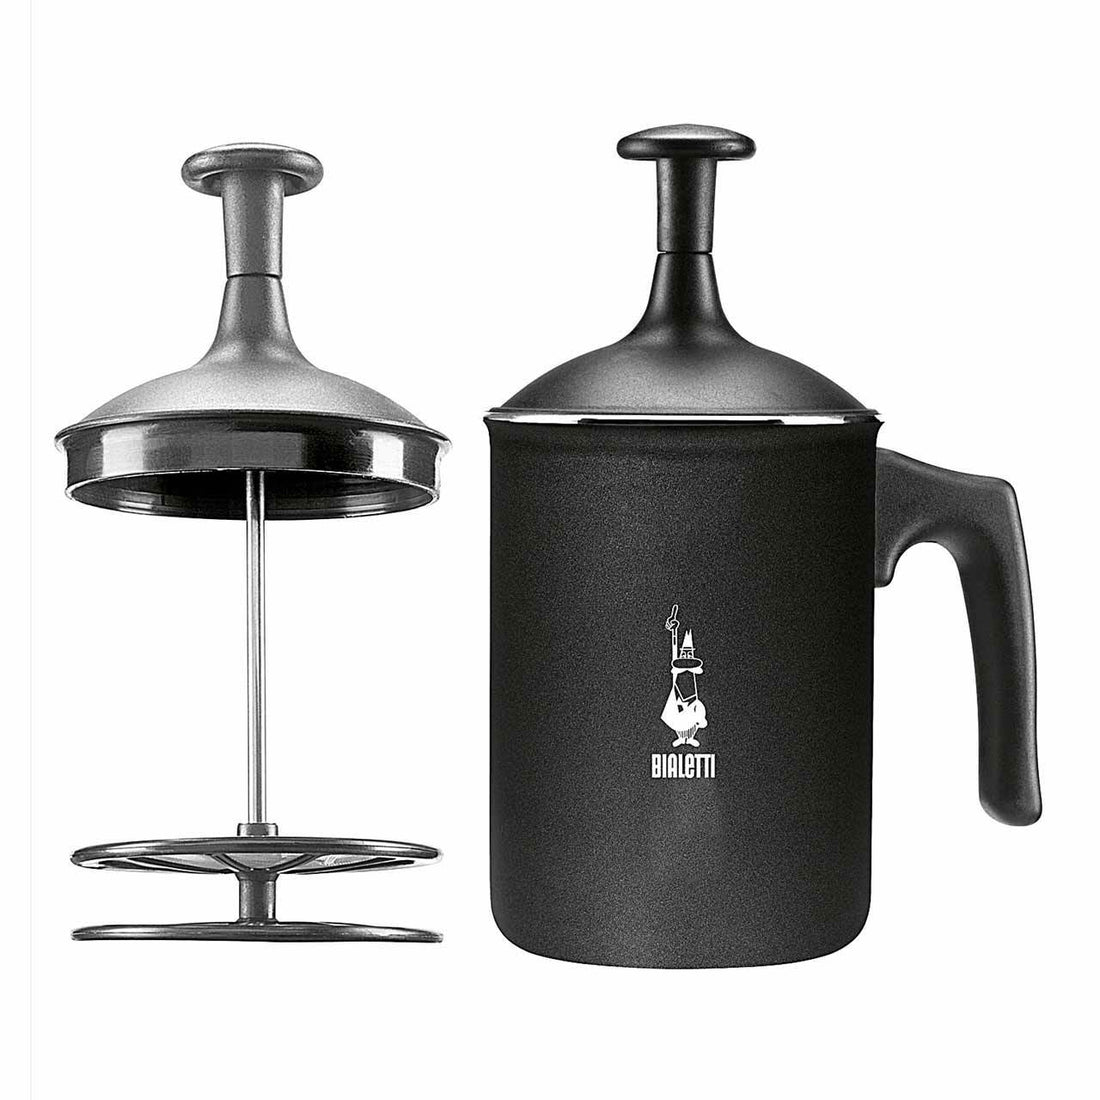 Bialetti Tuttocrema Milk Frother - 6 Cup